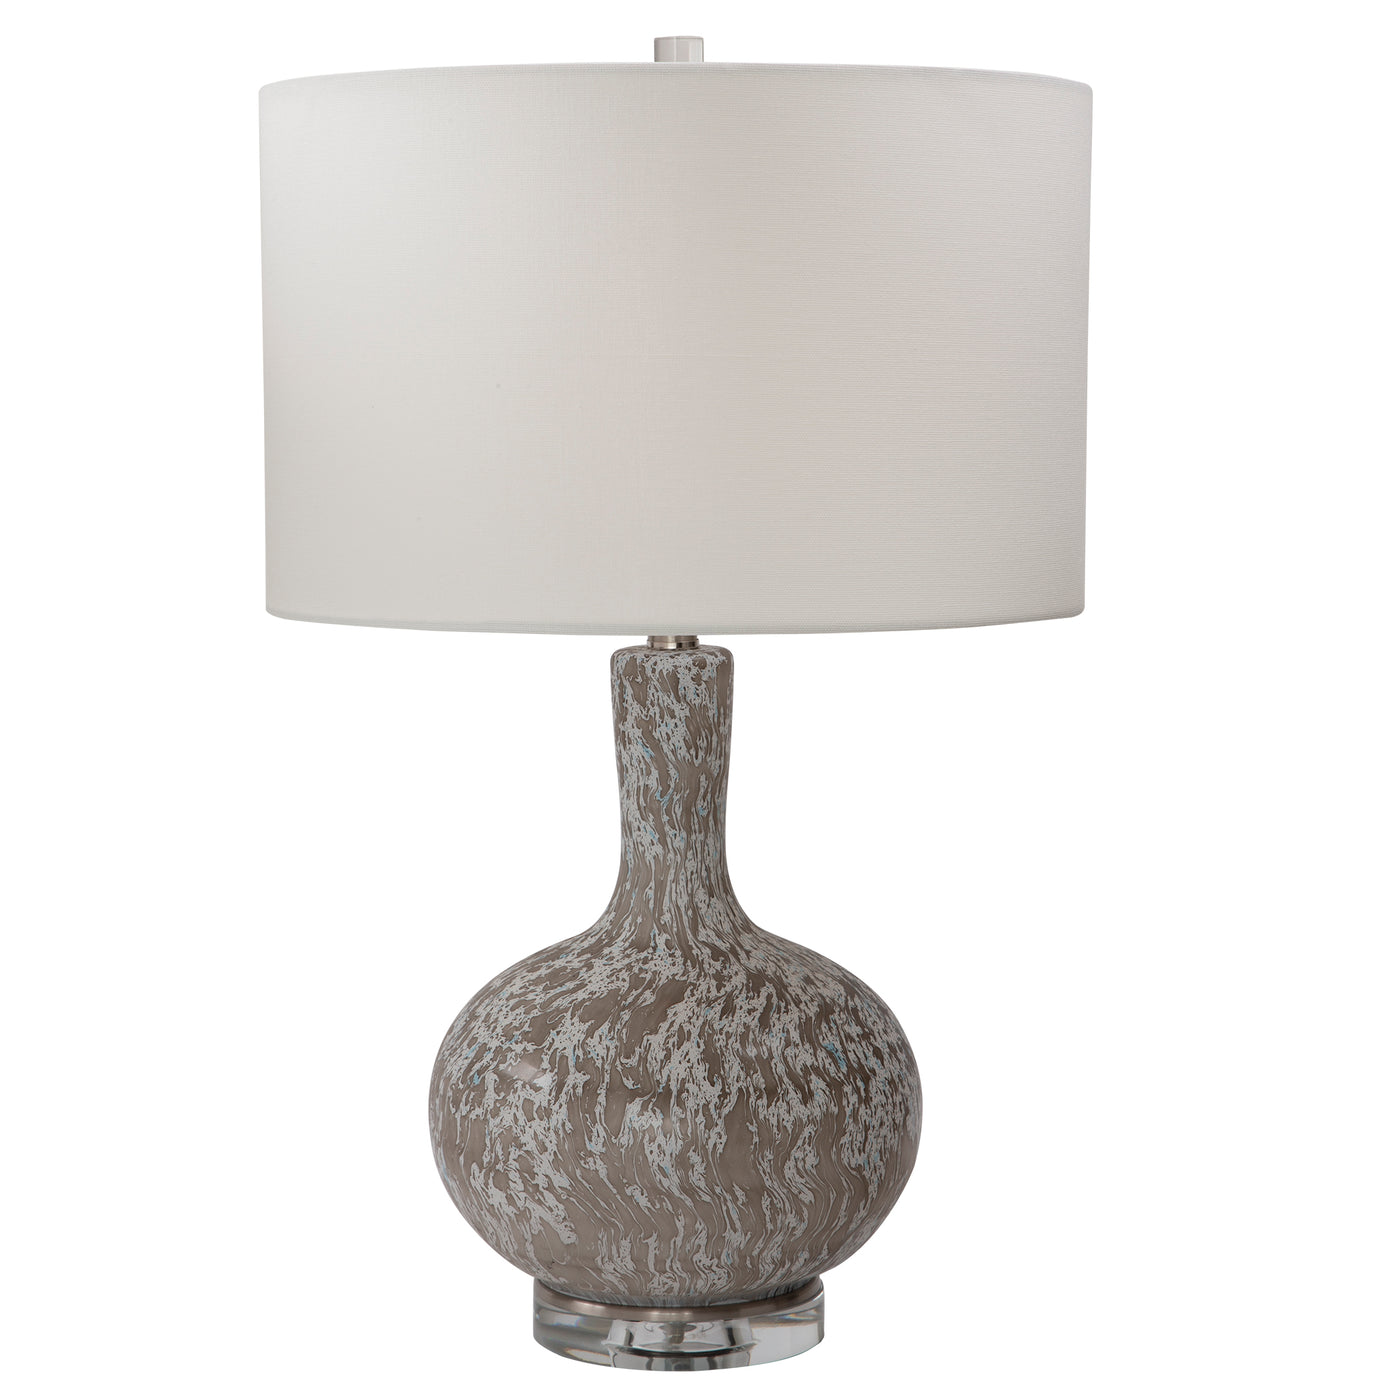 This Glass Table Lamp Features A Timeless Shape Finished In A Distressed White With A Myriad Of Black And Gray Flecks, Acc...